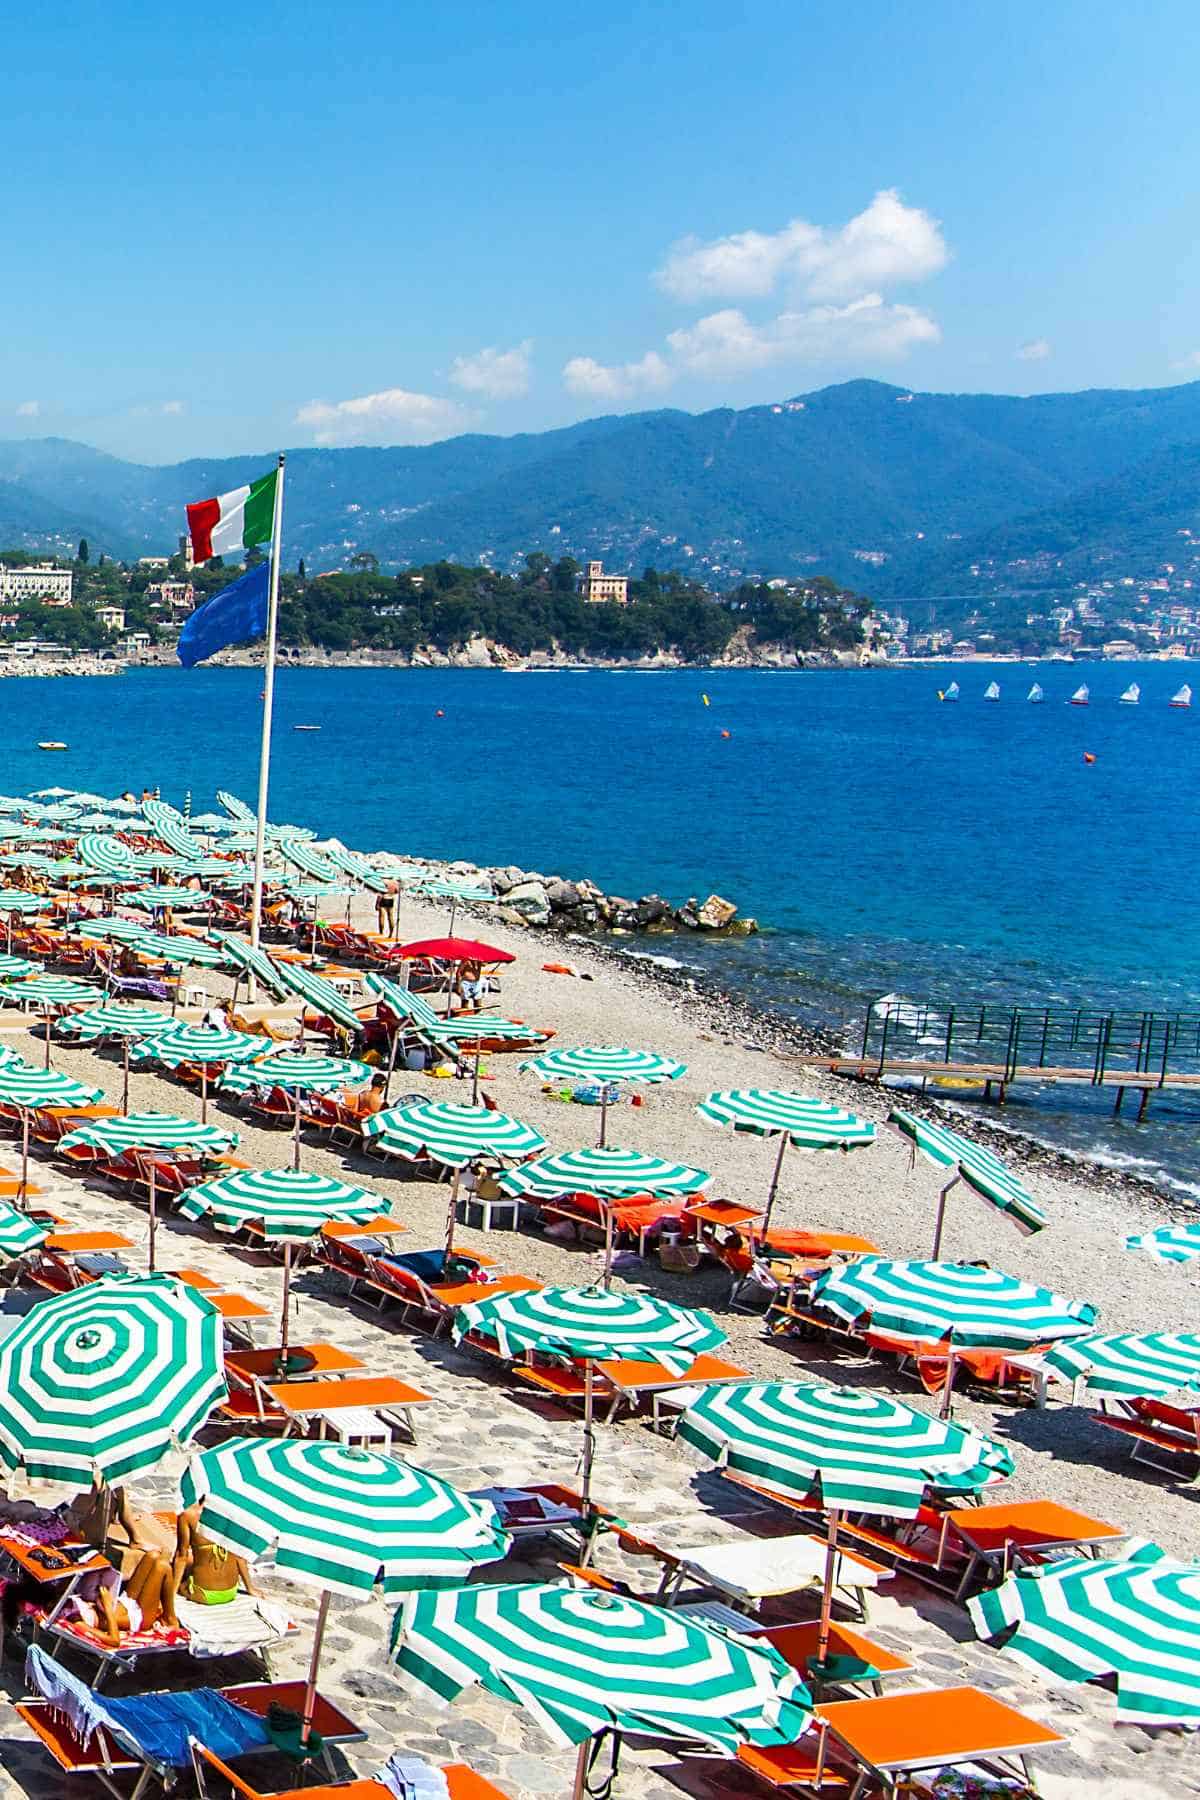 Portofino travel guide, all you need to know.